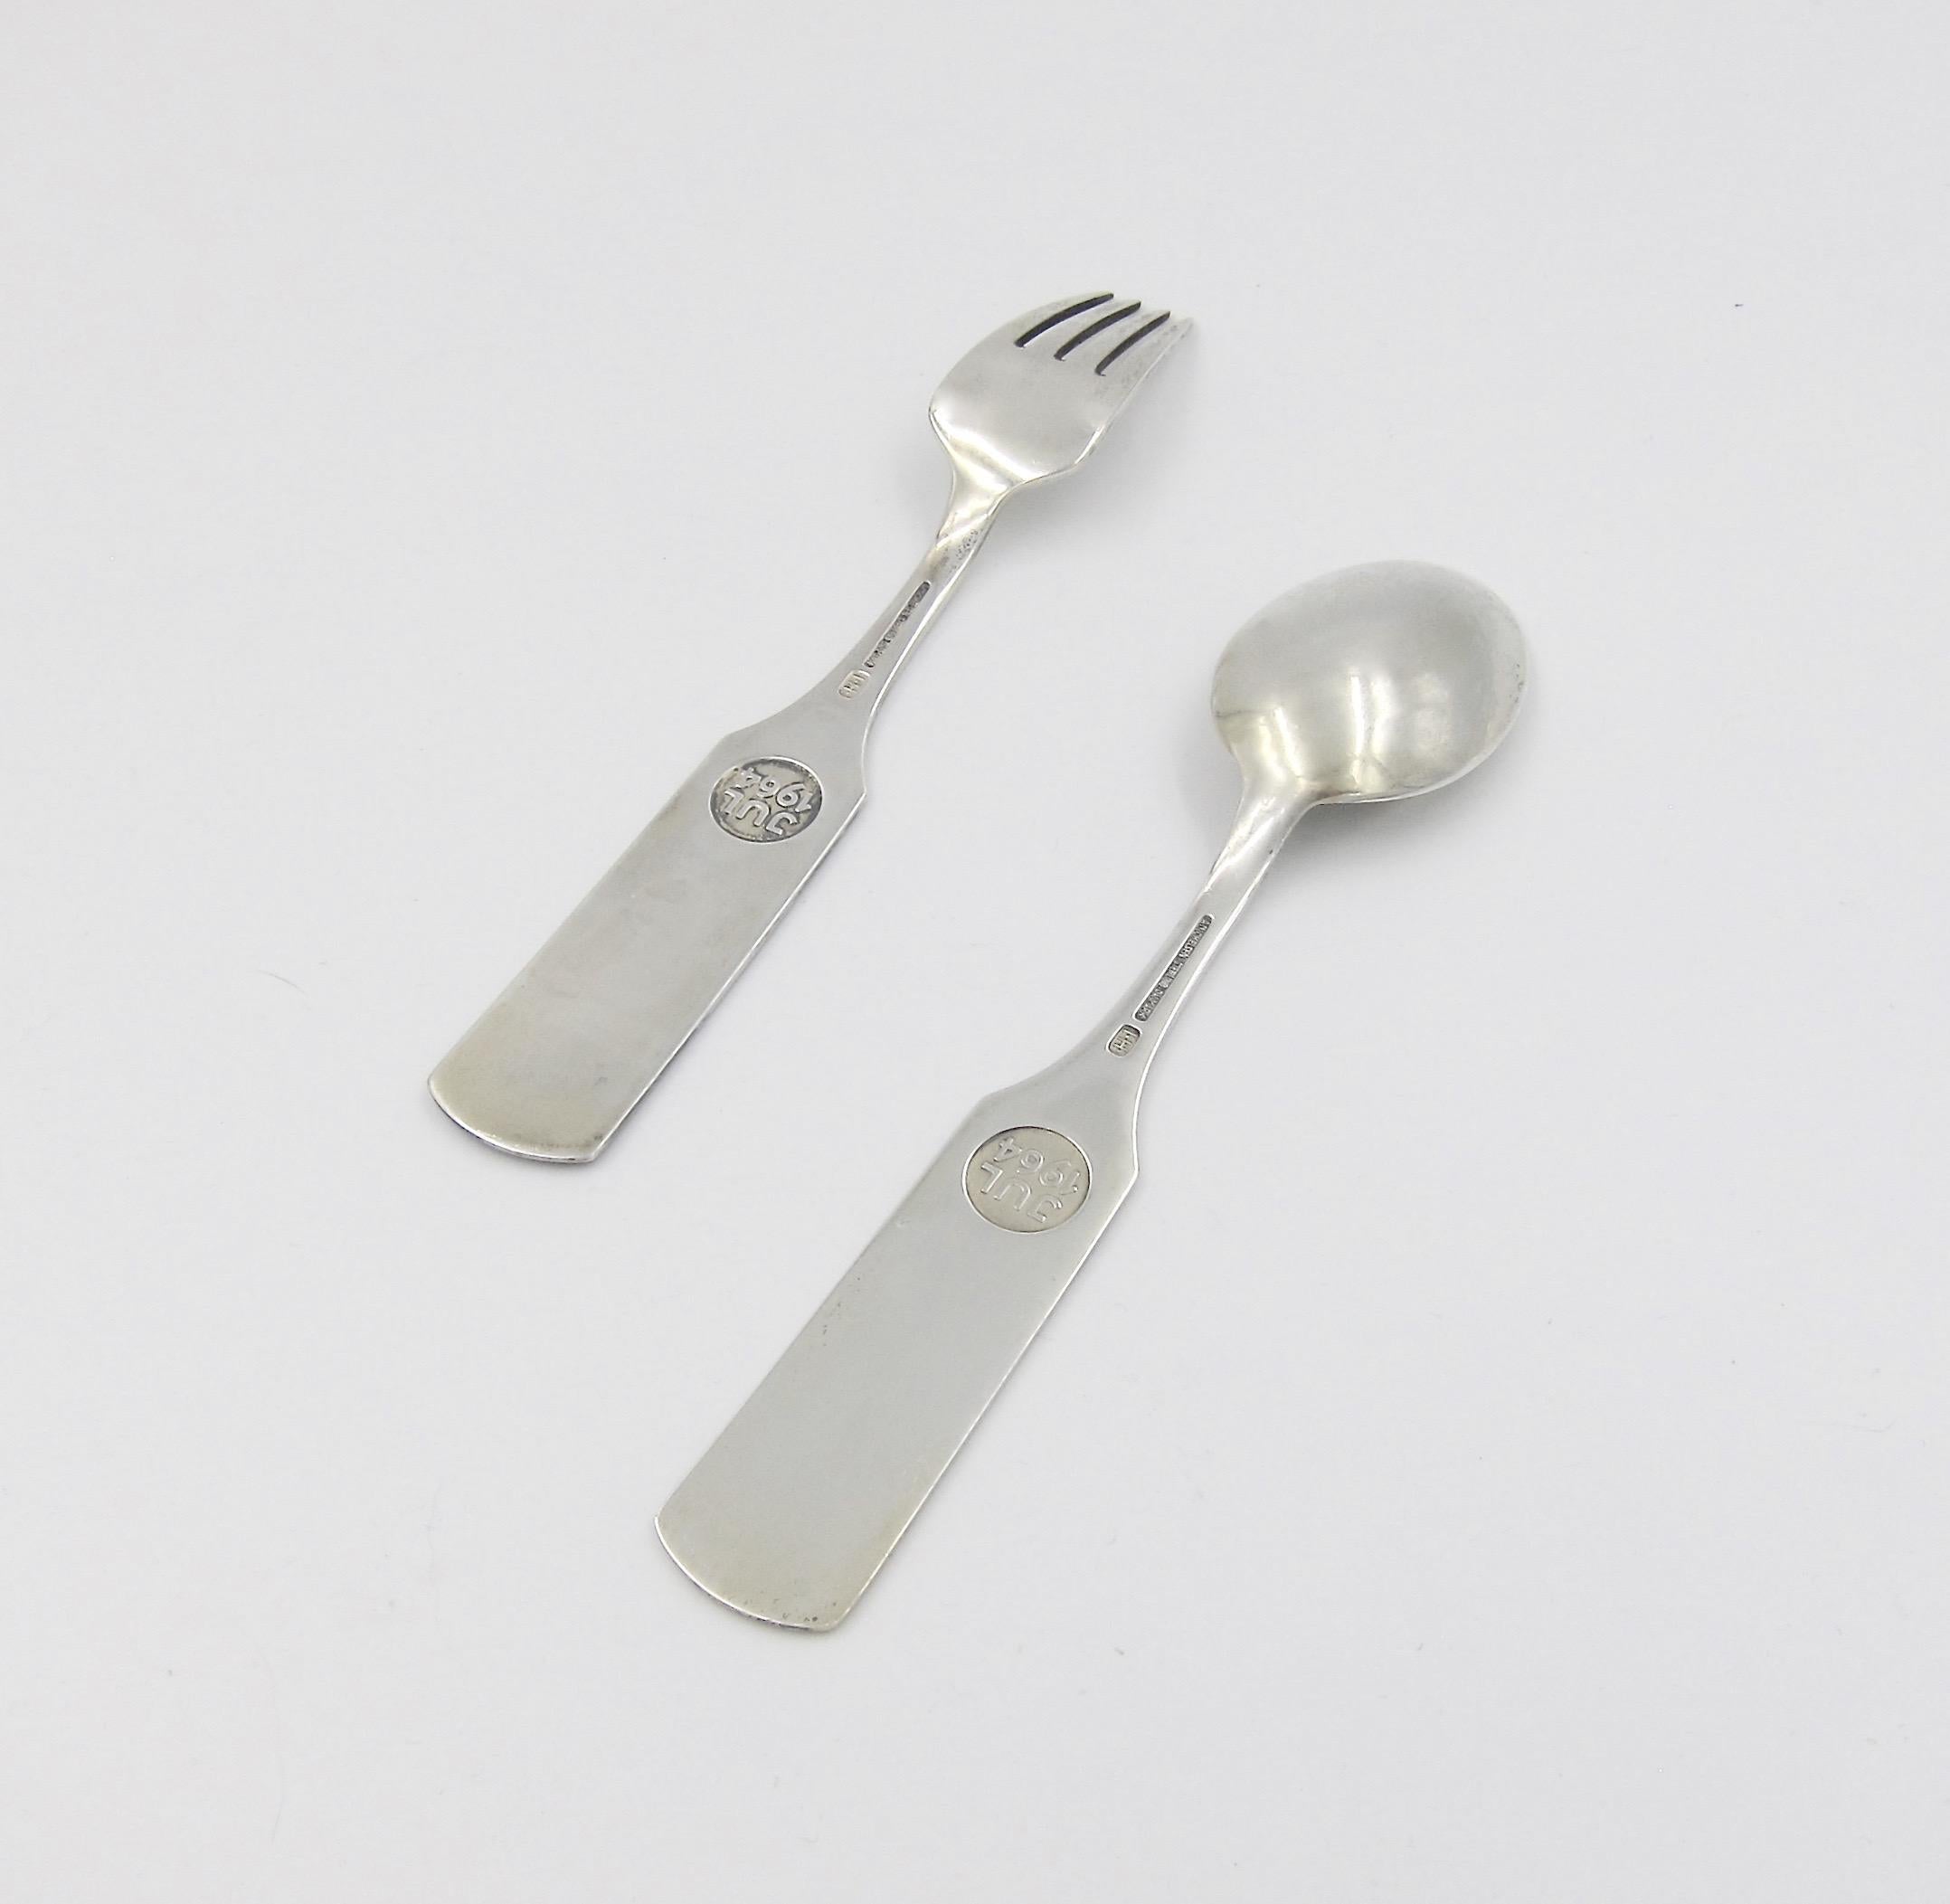 Danish 1964 Anton Michelsen Silver and Enamel Orion Christmas Fork and Spoon Set